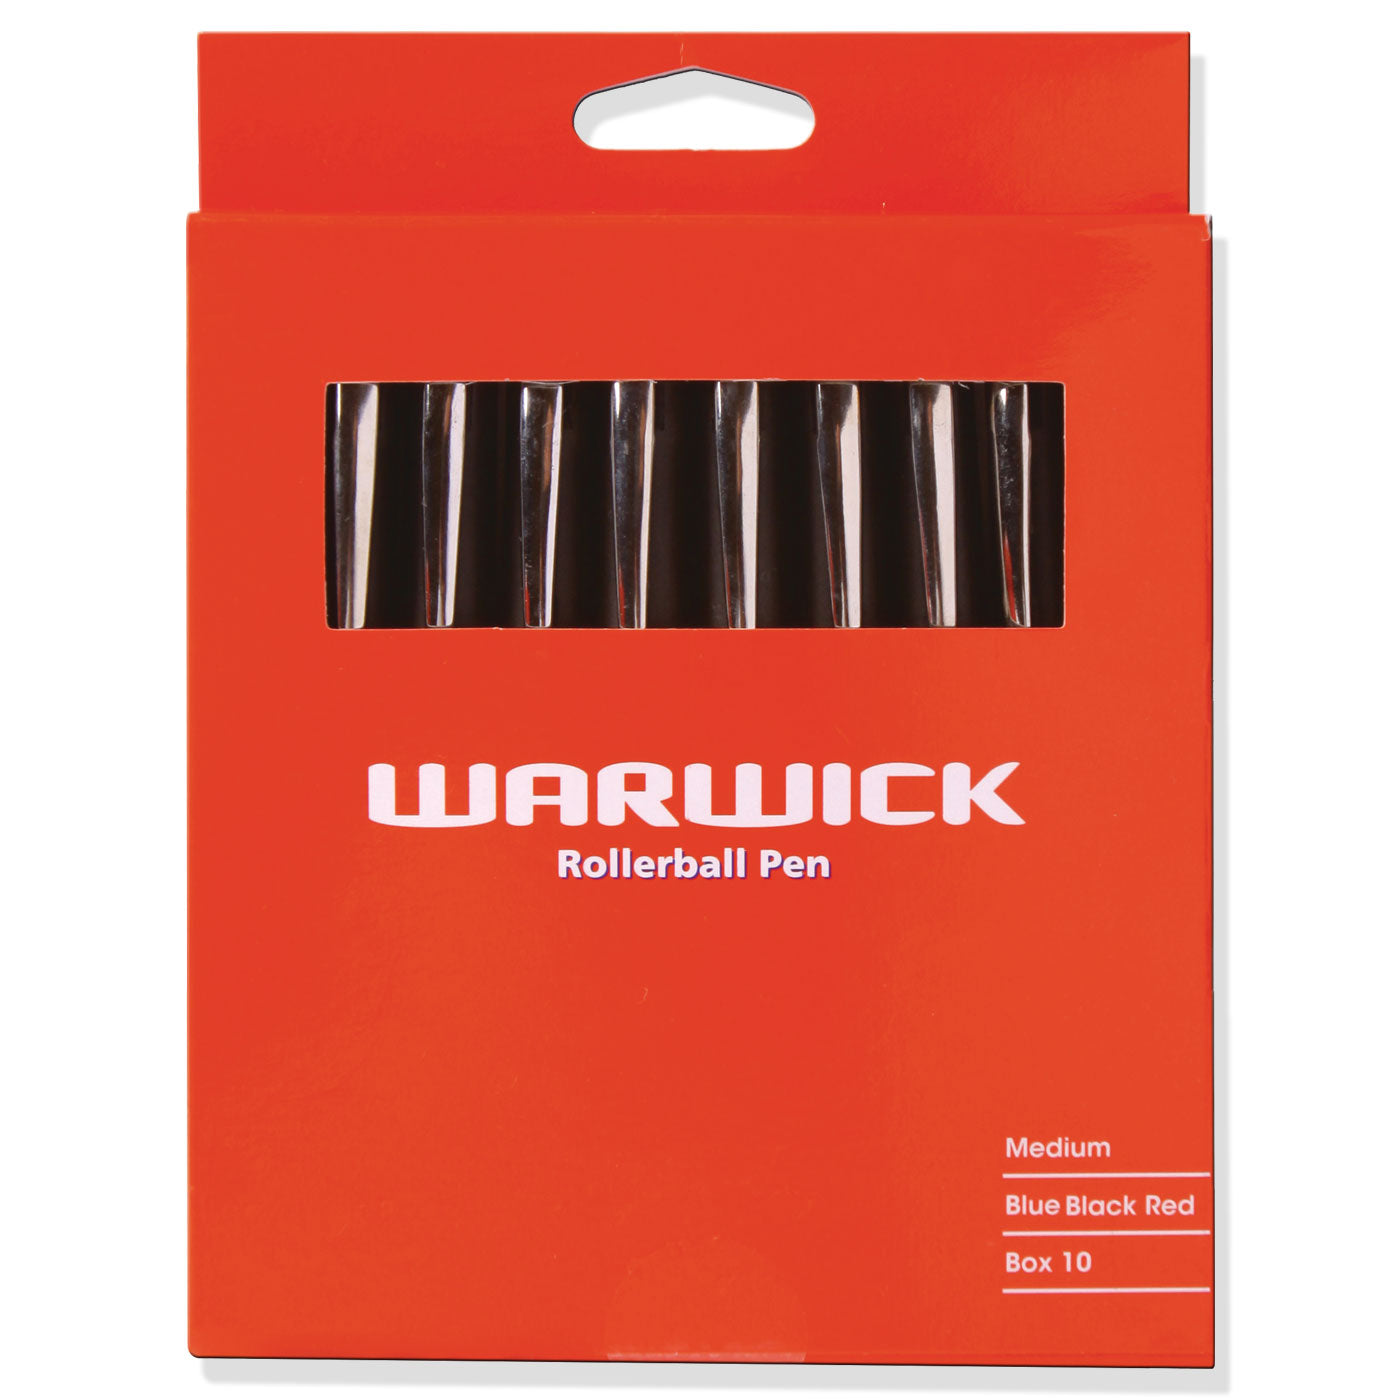 Warwick Pen Rollerball Capped Blue, Black & Red - Box 10